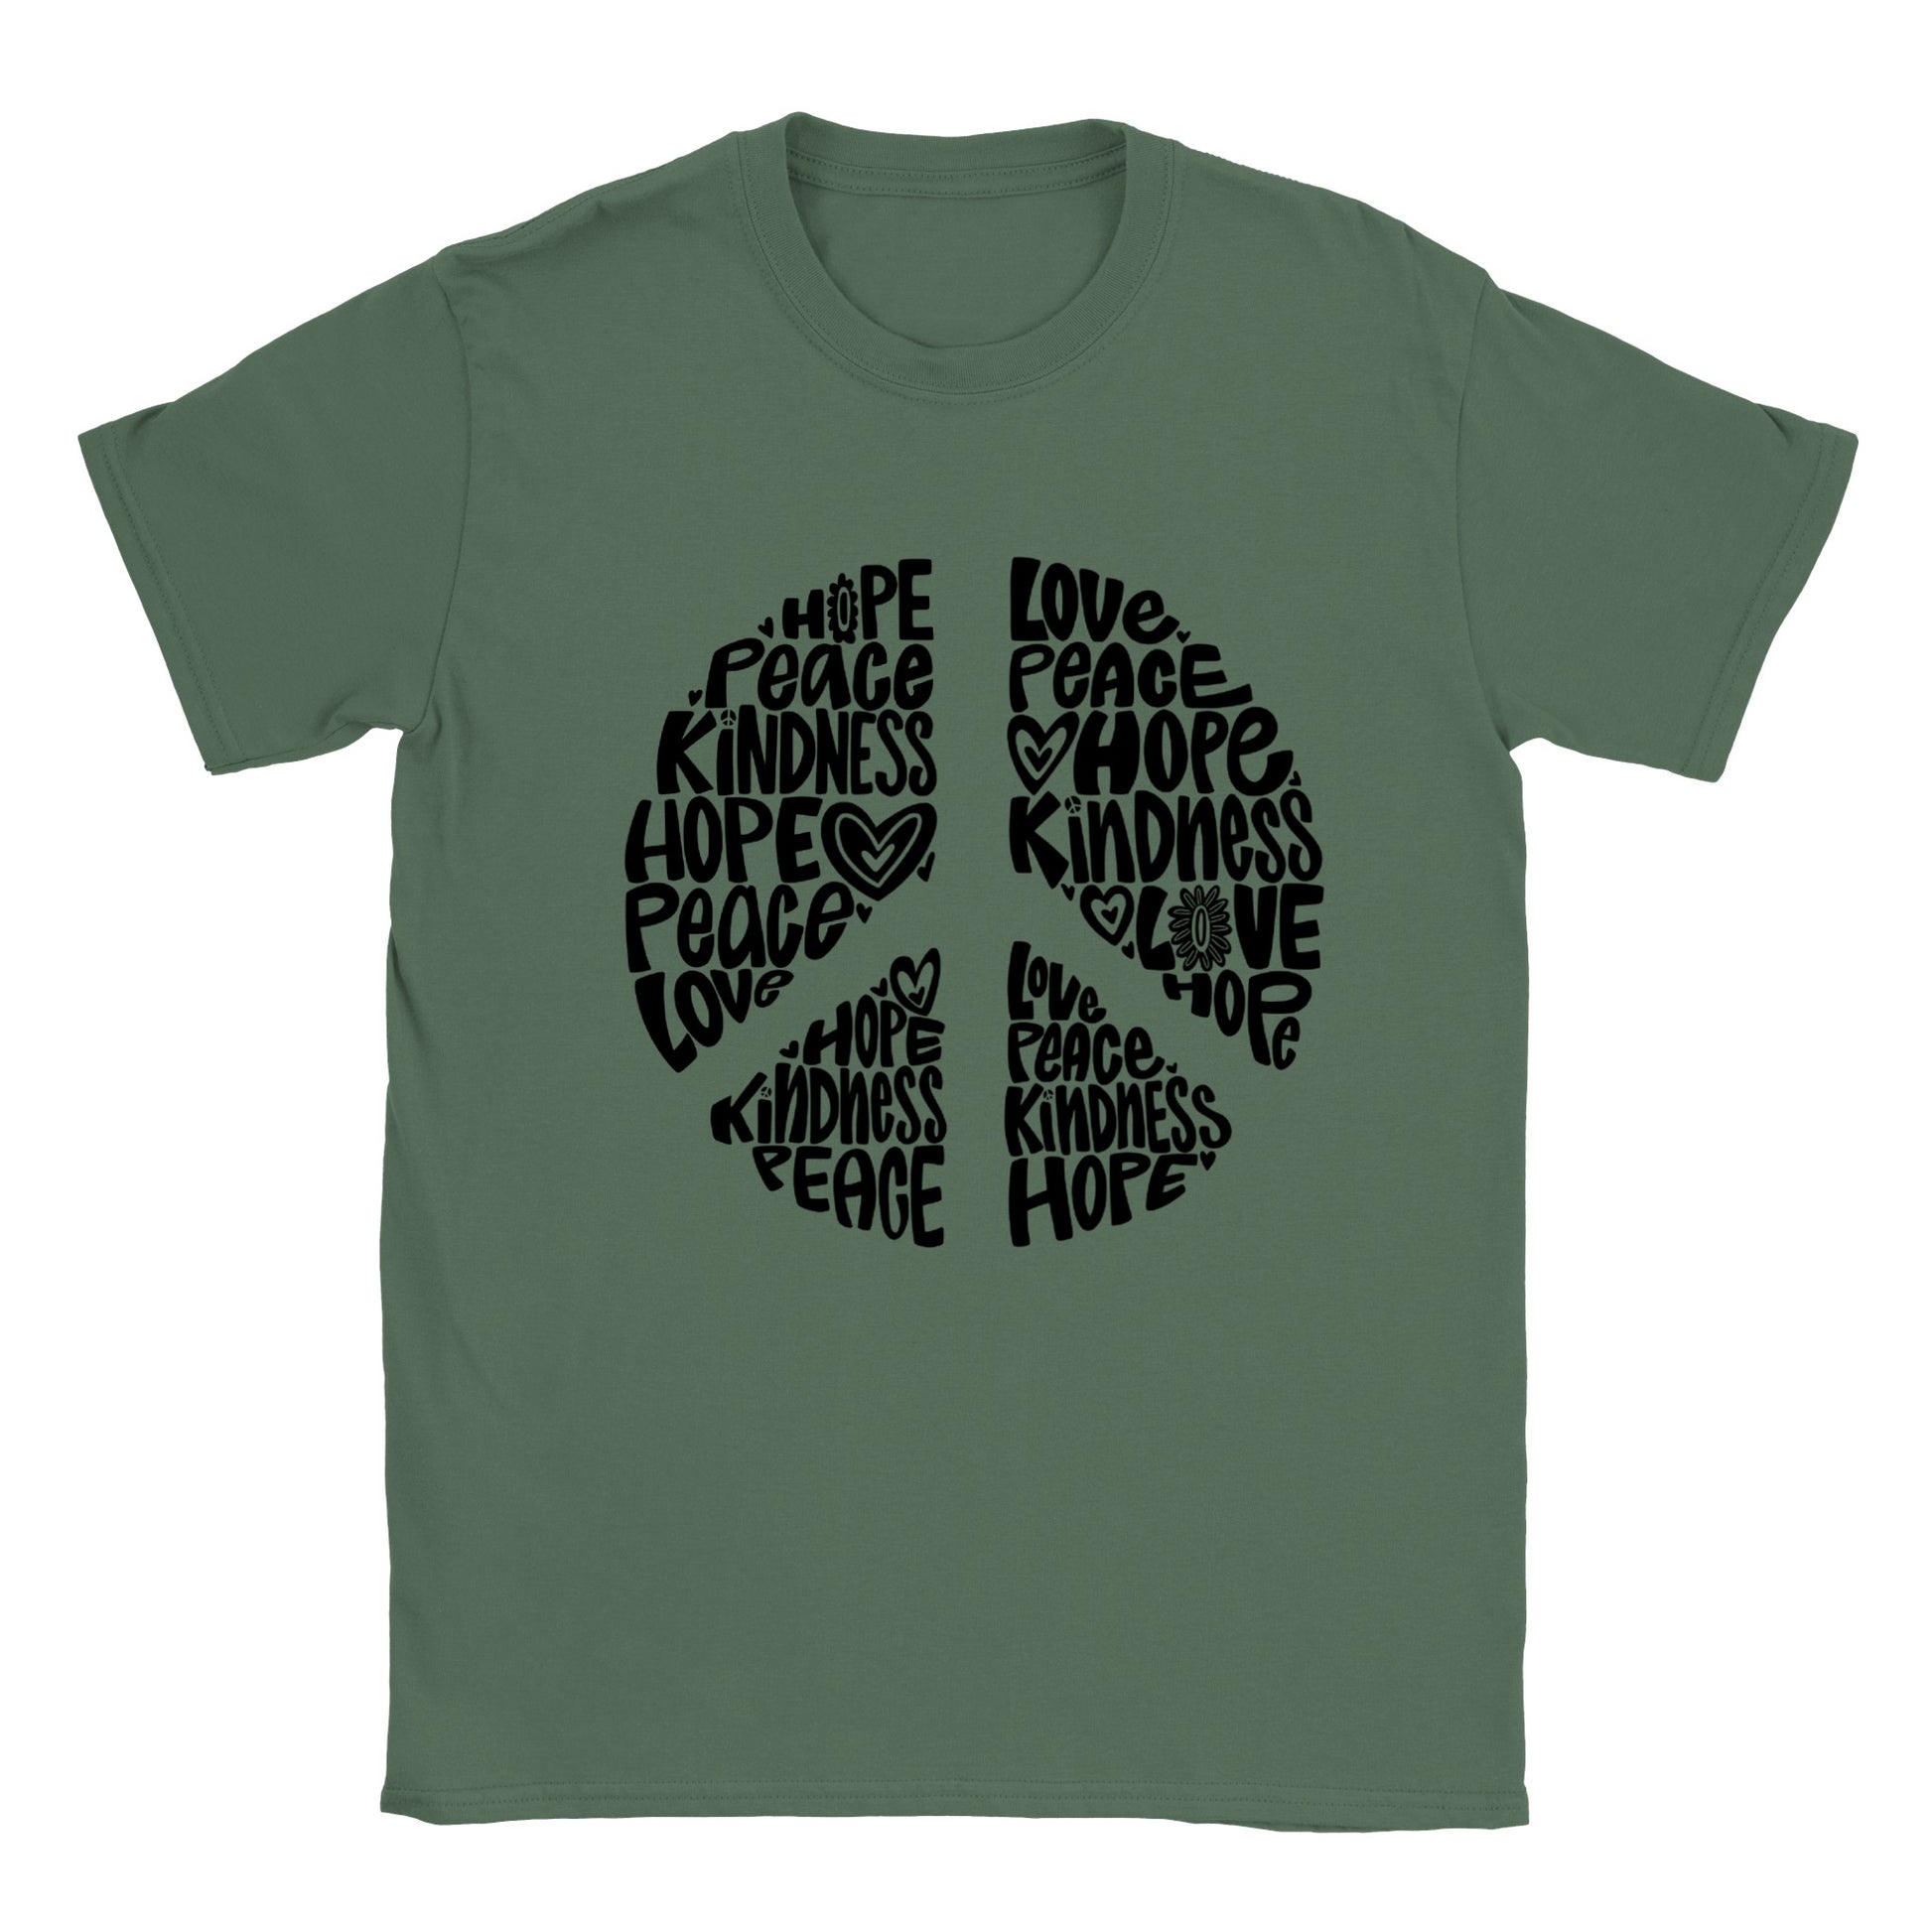 Love, Hope, Peace, and Kindness - Classic Unisex Crewneck T-shirt - Mister Snarky's